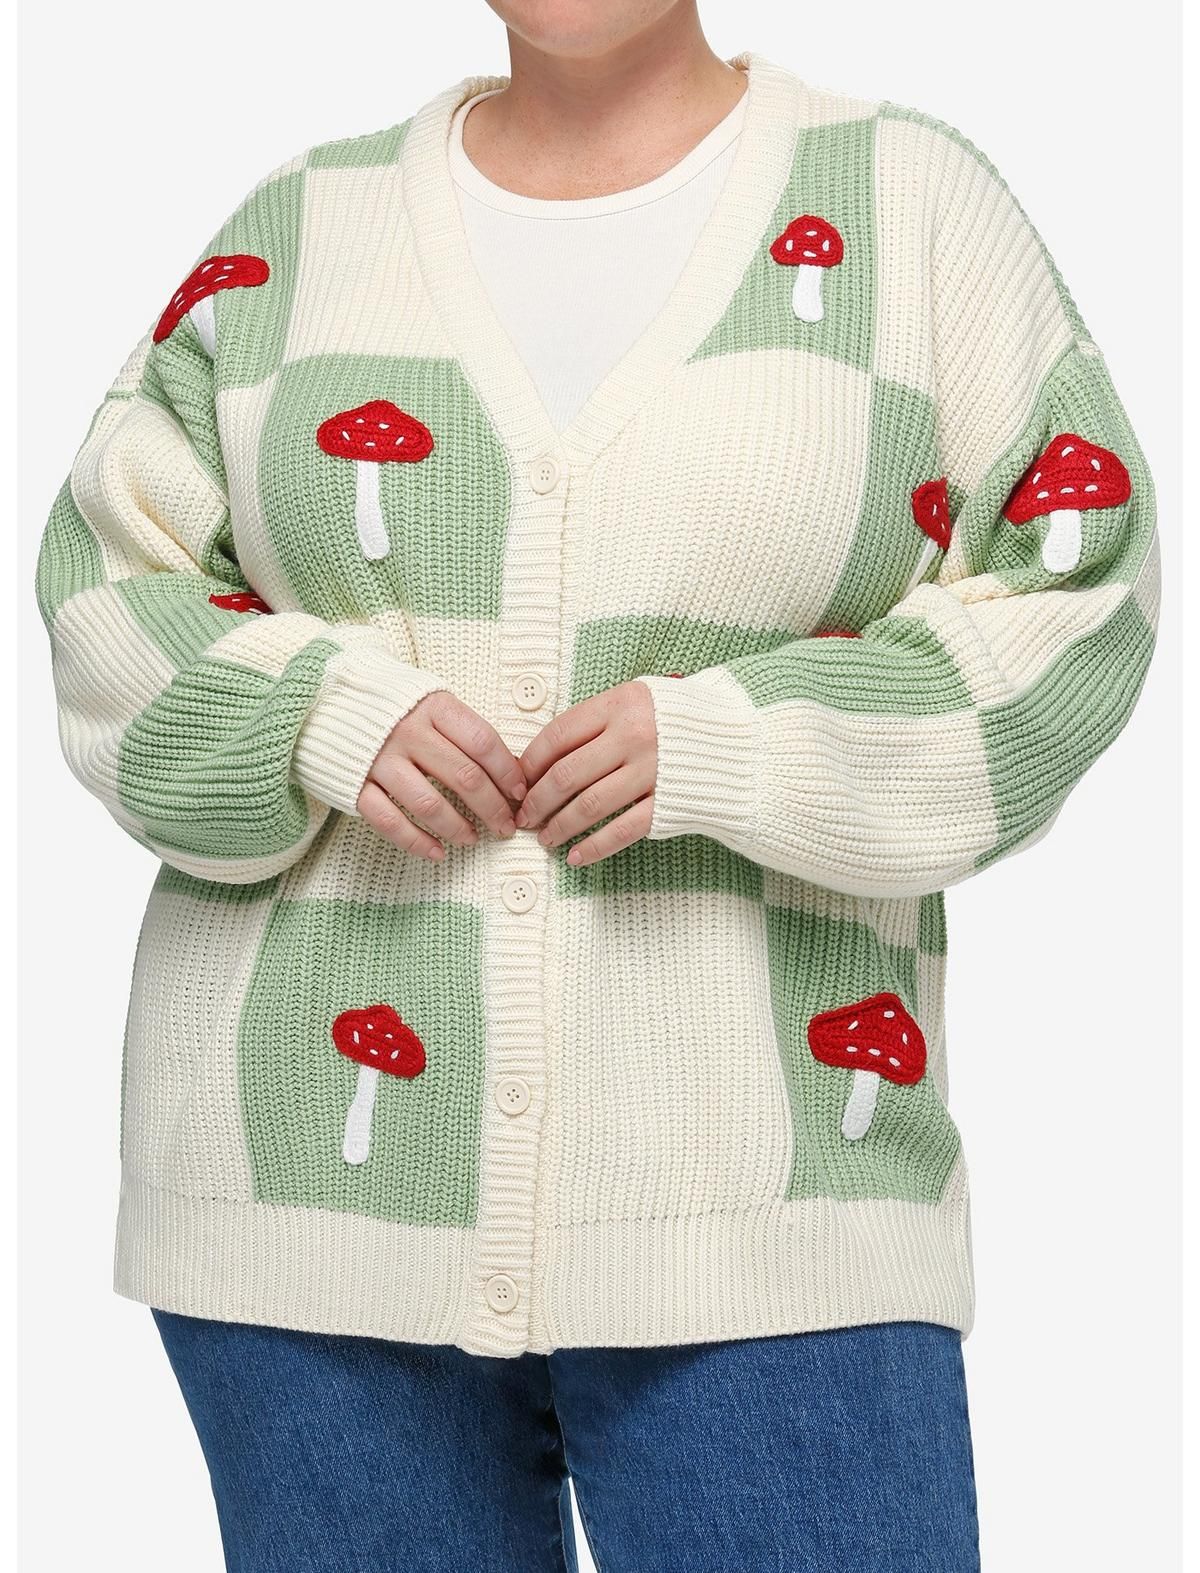 Thorn & Fable Mushroom Checkered Girls Cardigan Plus Size | Hot Topic | Hot Topic